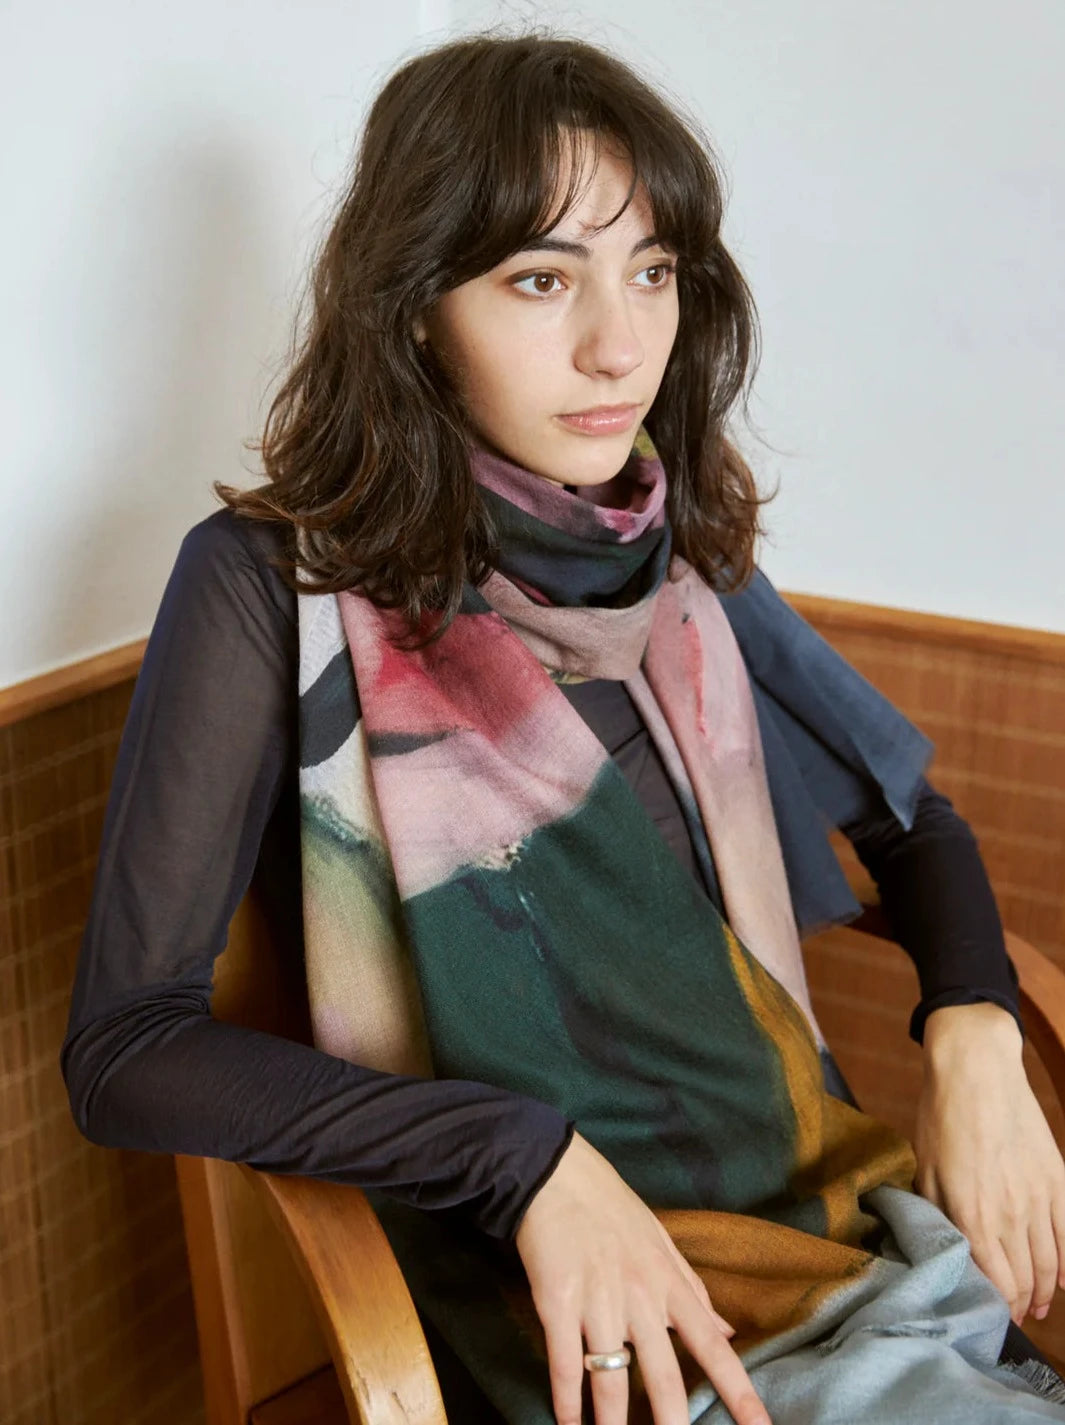 A person with shoulder-length brown hair sits in a wooden chair, wearing a long, Walker & Bing Edith Wool Scarf made of 100% wool over a dark top.